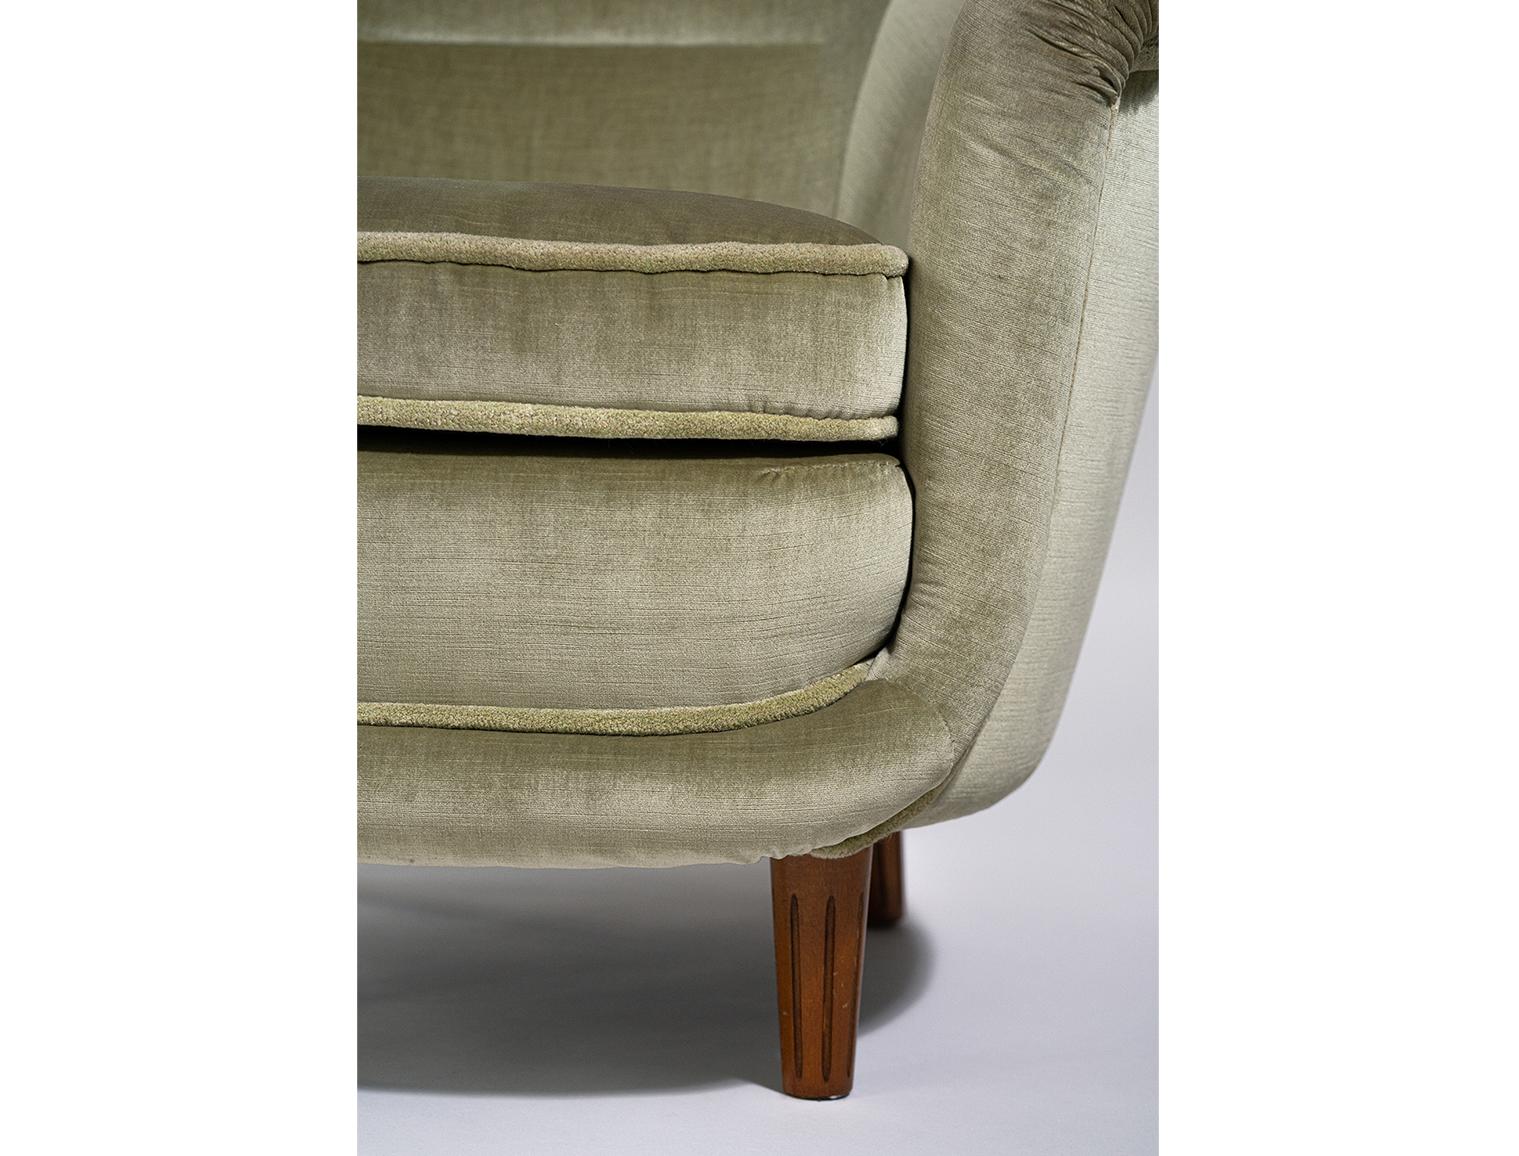 Mid-20th Century Club Lounge Chairs from the 1930/40s with Original Mohair Fabric, Detailed Legs